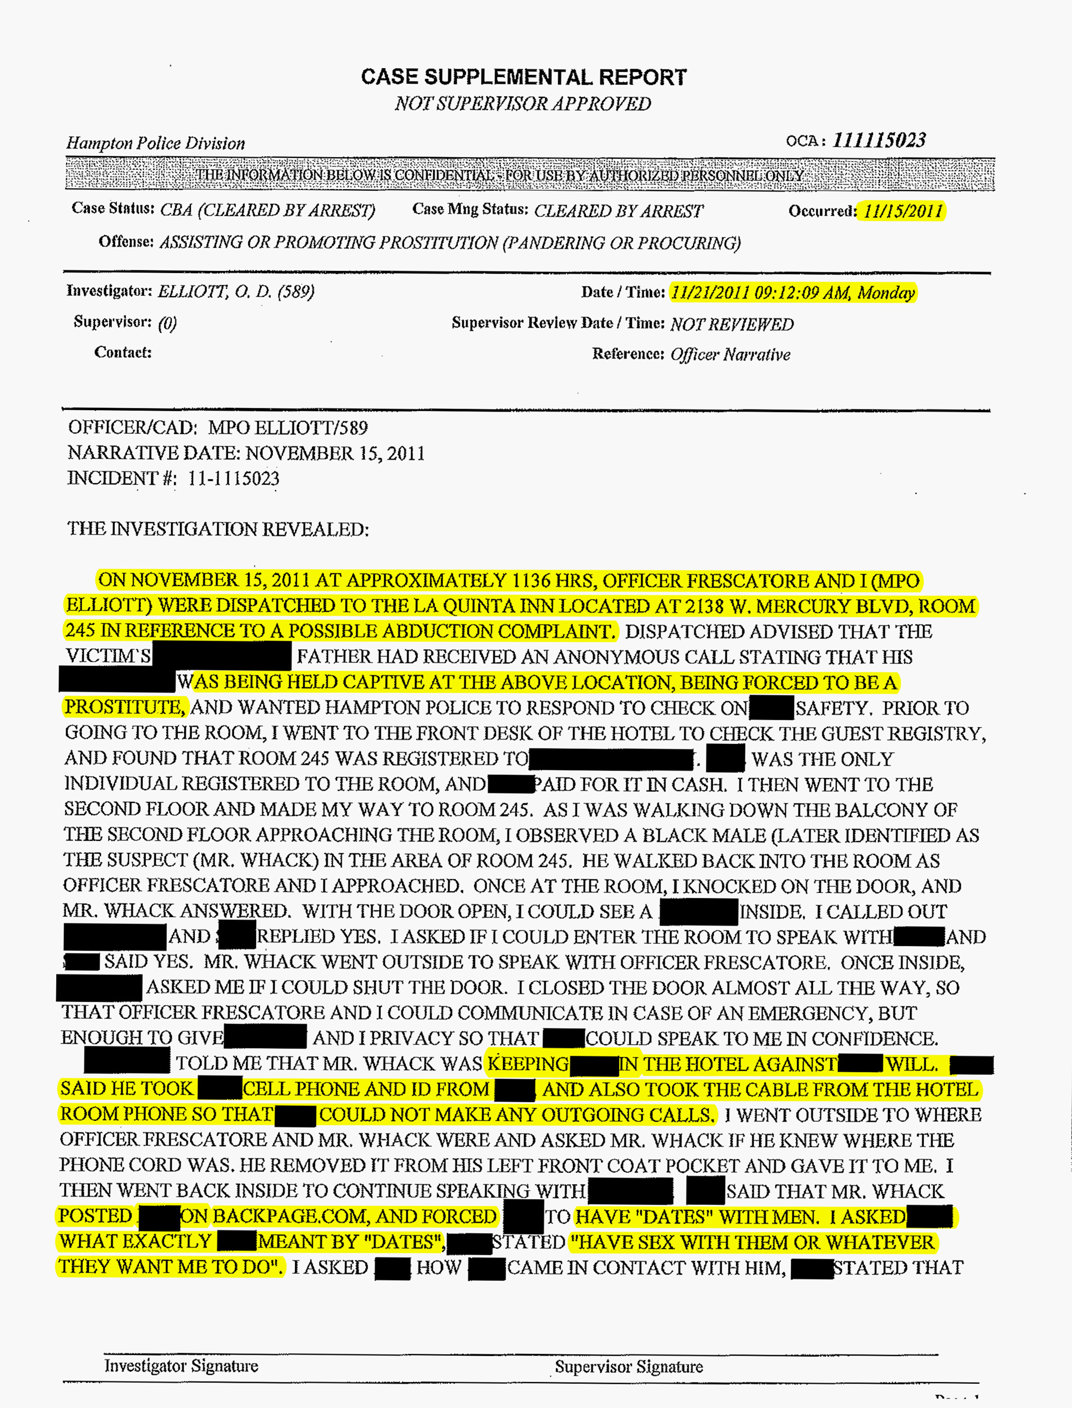 Hampton police report about Ron Miscavige hooker page 2